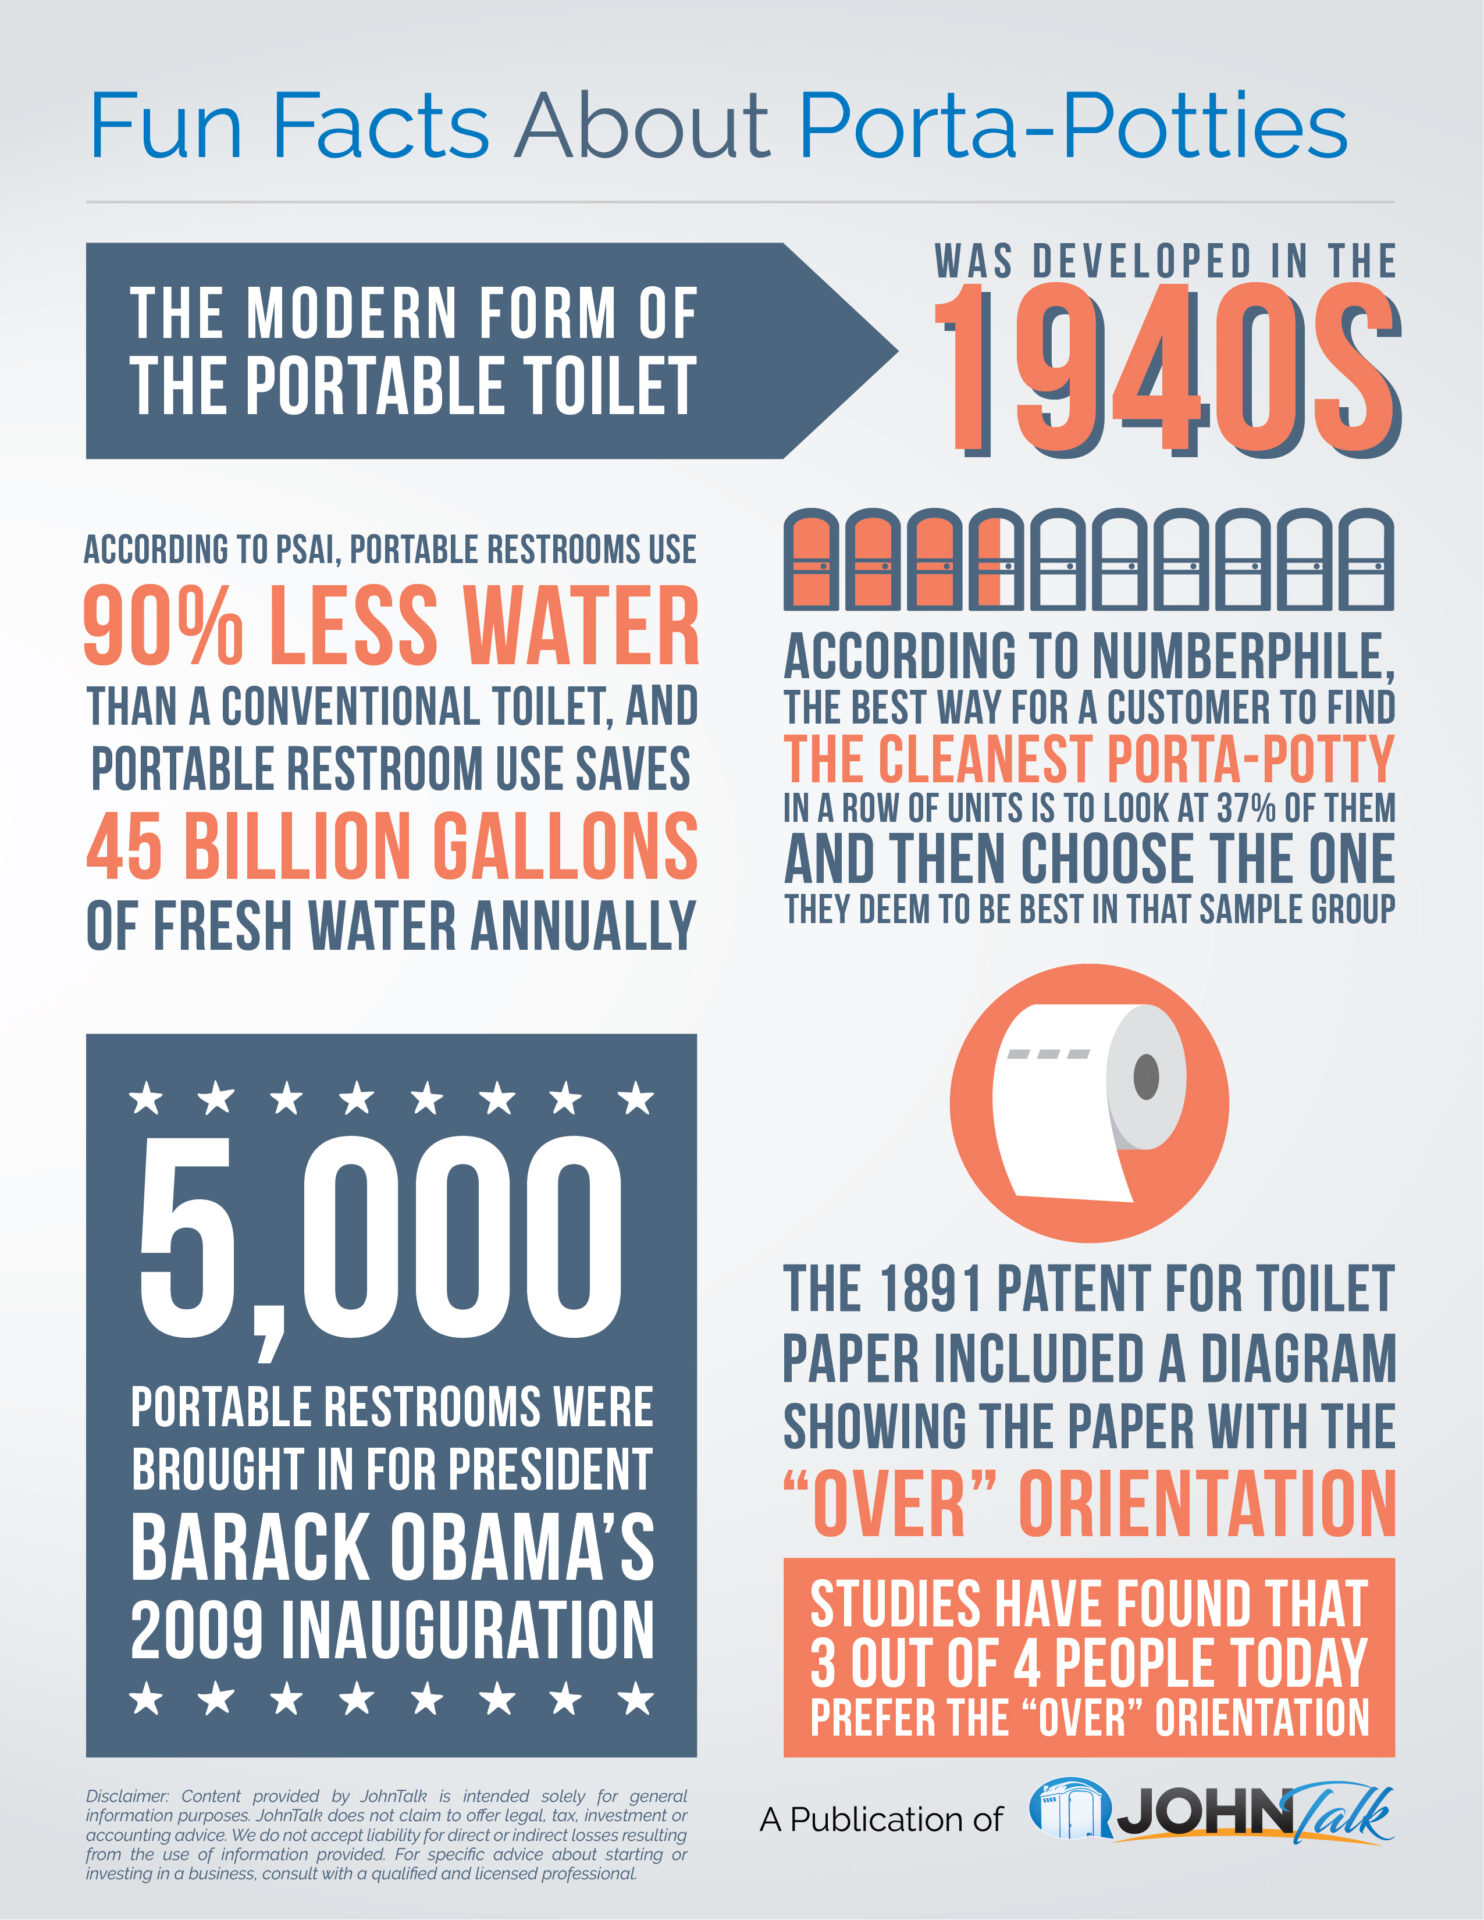 INFOGRAPHIC: Fun Facts About Porta-Potties - JohnTalk